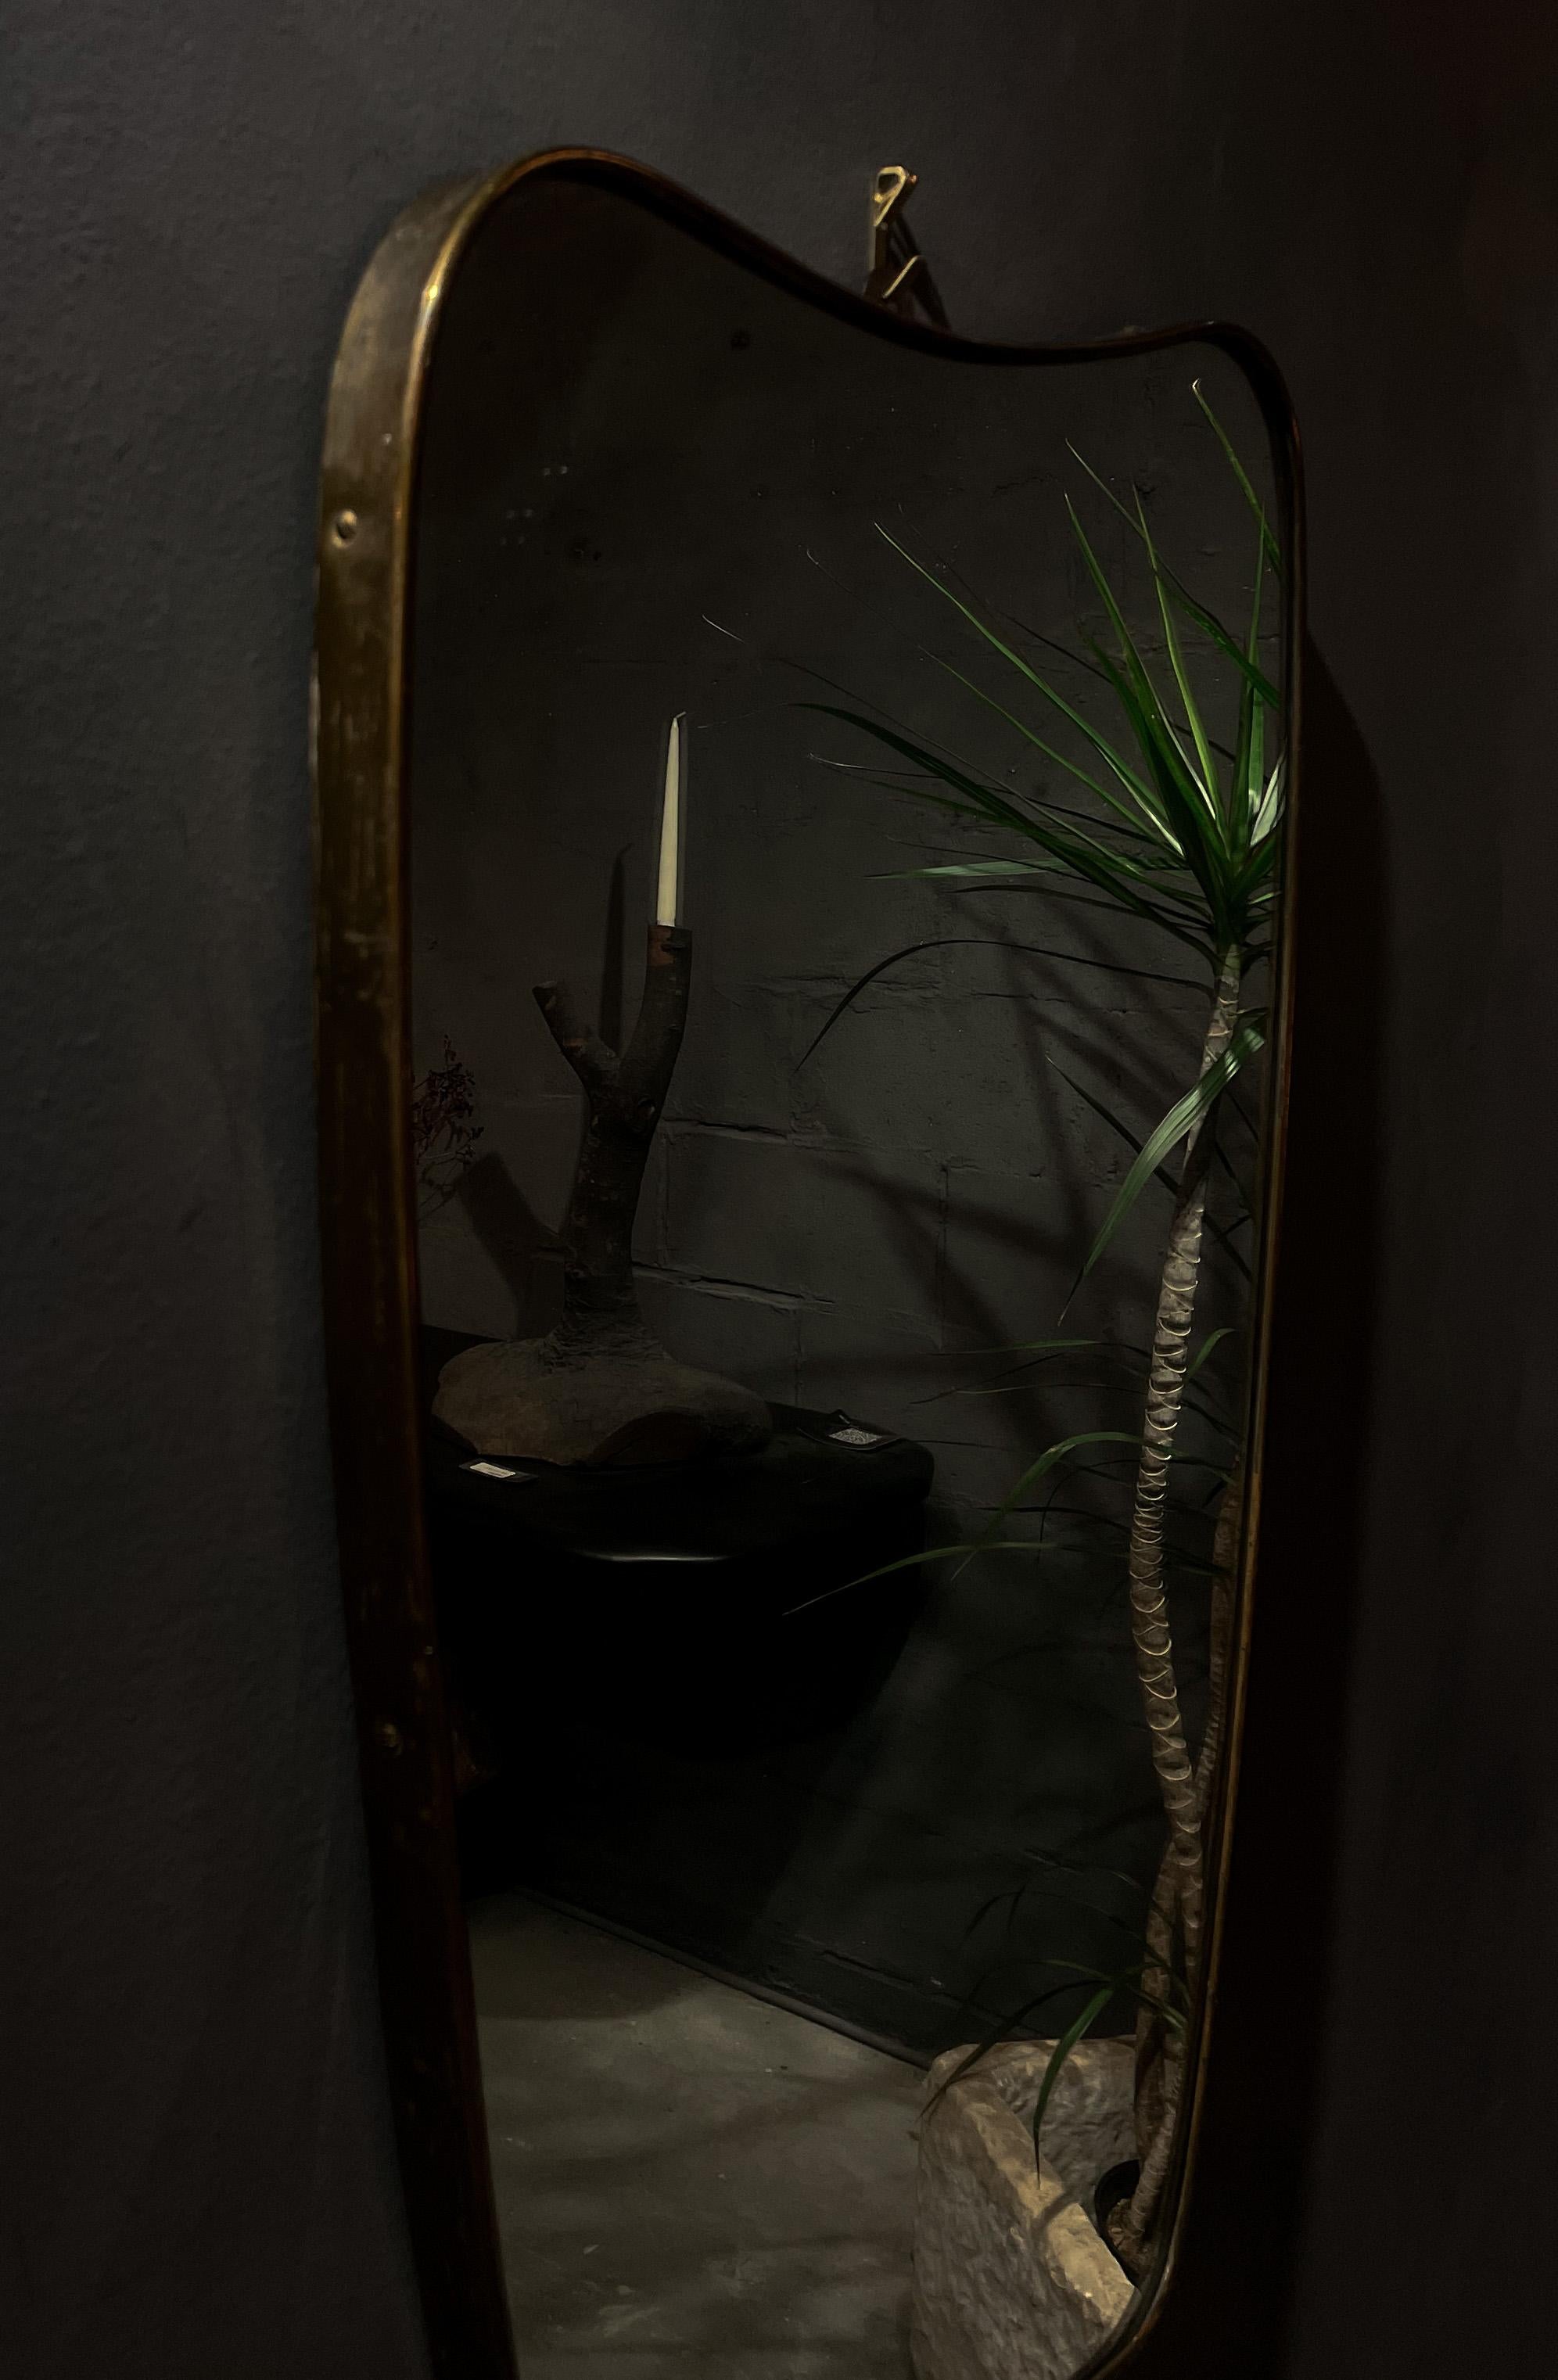 Mid-20th Century Brass Italian Mirror In The Manner of Gio Ponti - Circa 1950s For Sale